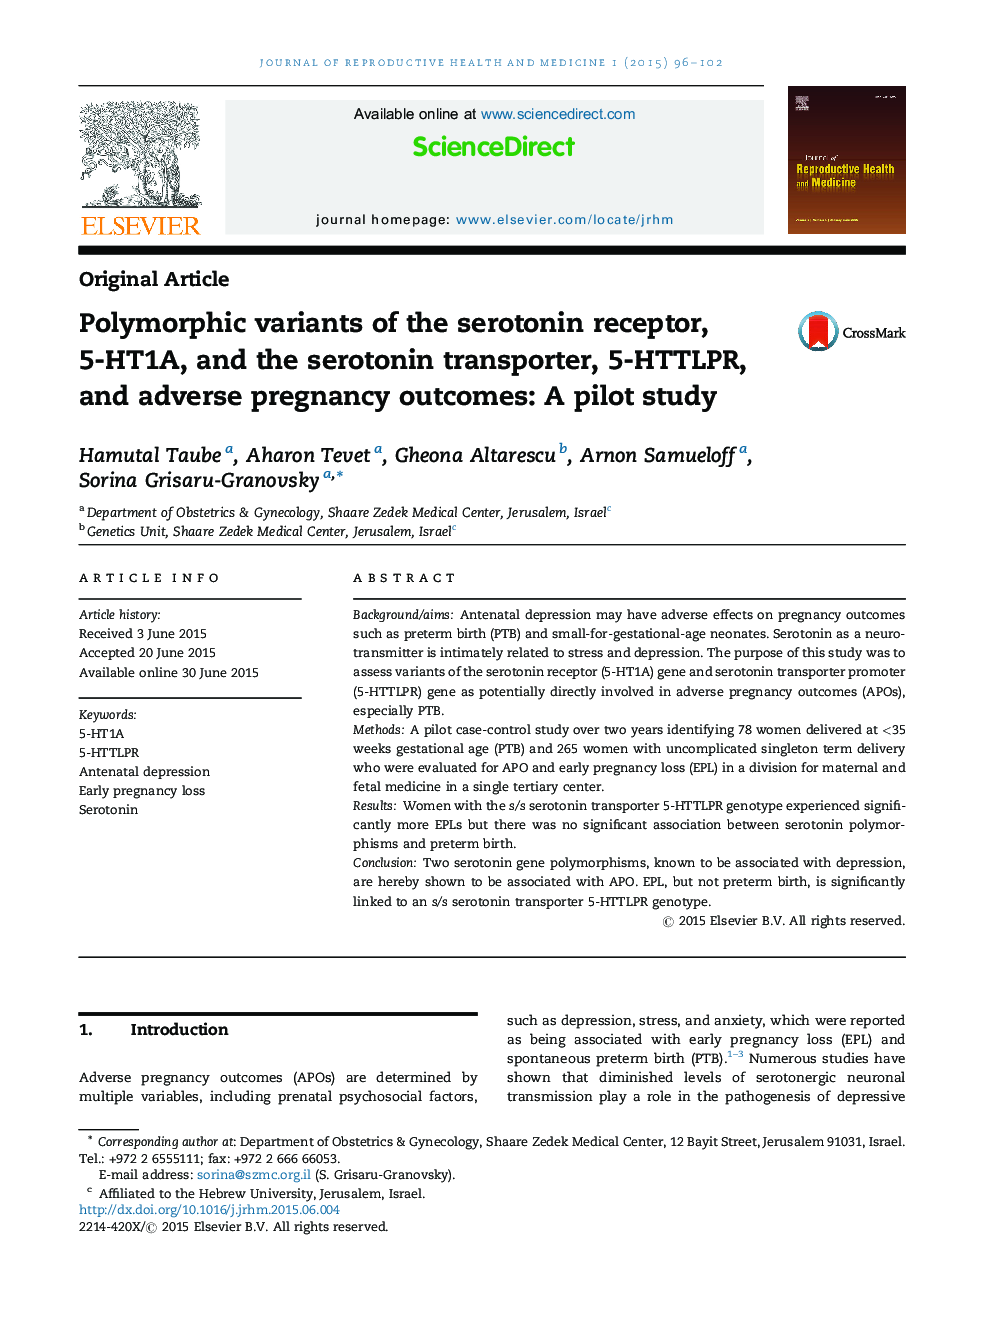 Polymorphic variants of the serotonin receptor, 5-HT1A, and the serotonin transporter, 5-HTTLPR, and adverse pregnancy outcomes: A pilot study